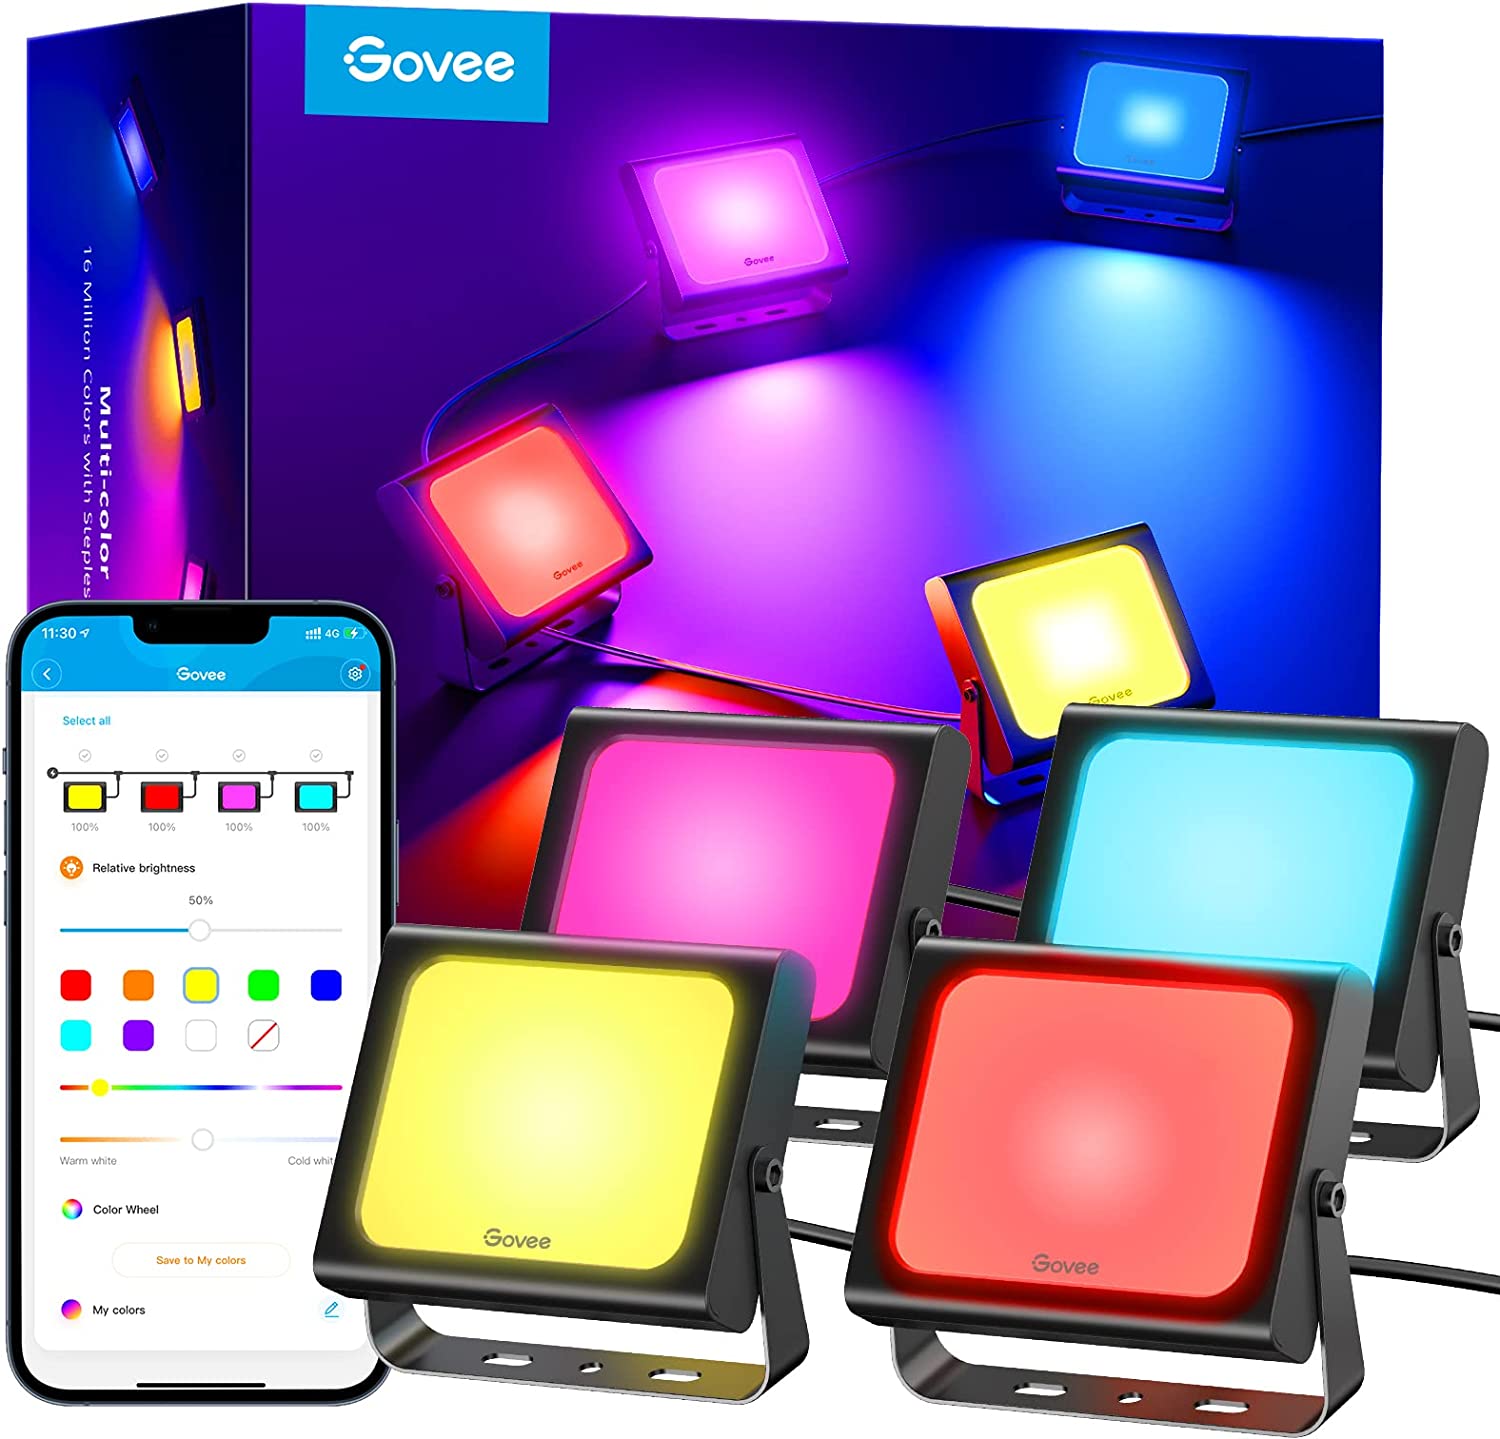 4-Pk Govee Outdoor RGBIC Landscape LED IP66 Waterproof Flood Lights $60 + Free Shipping